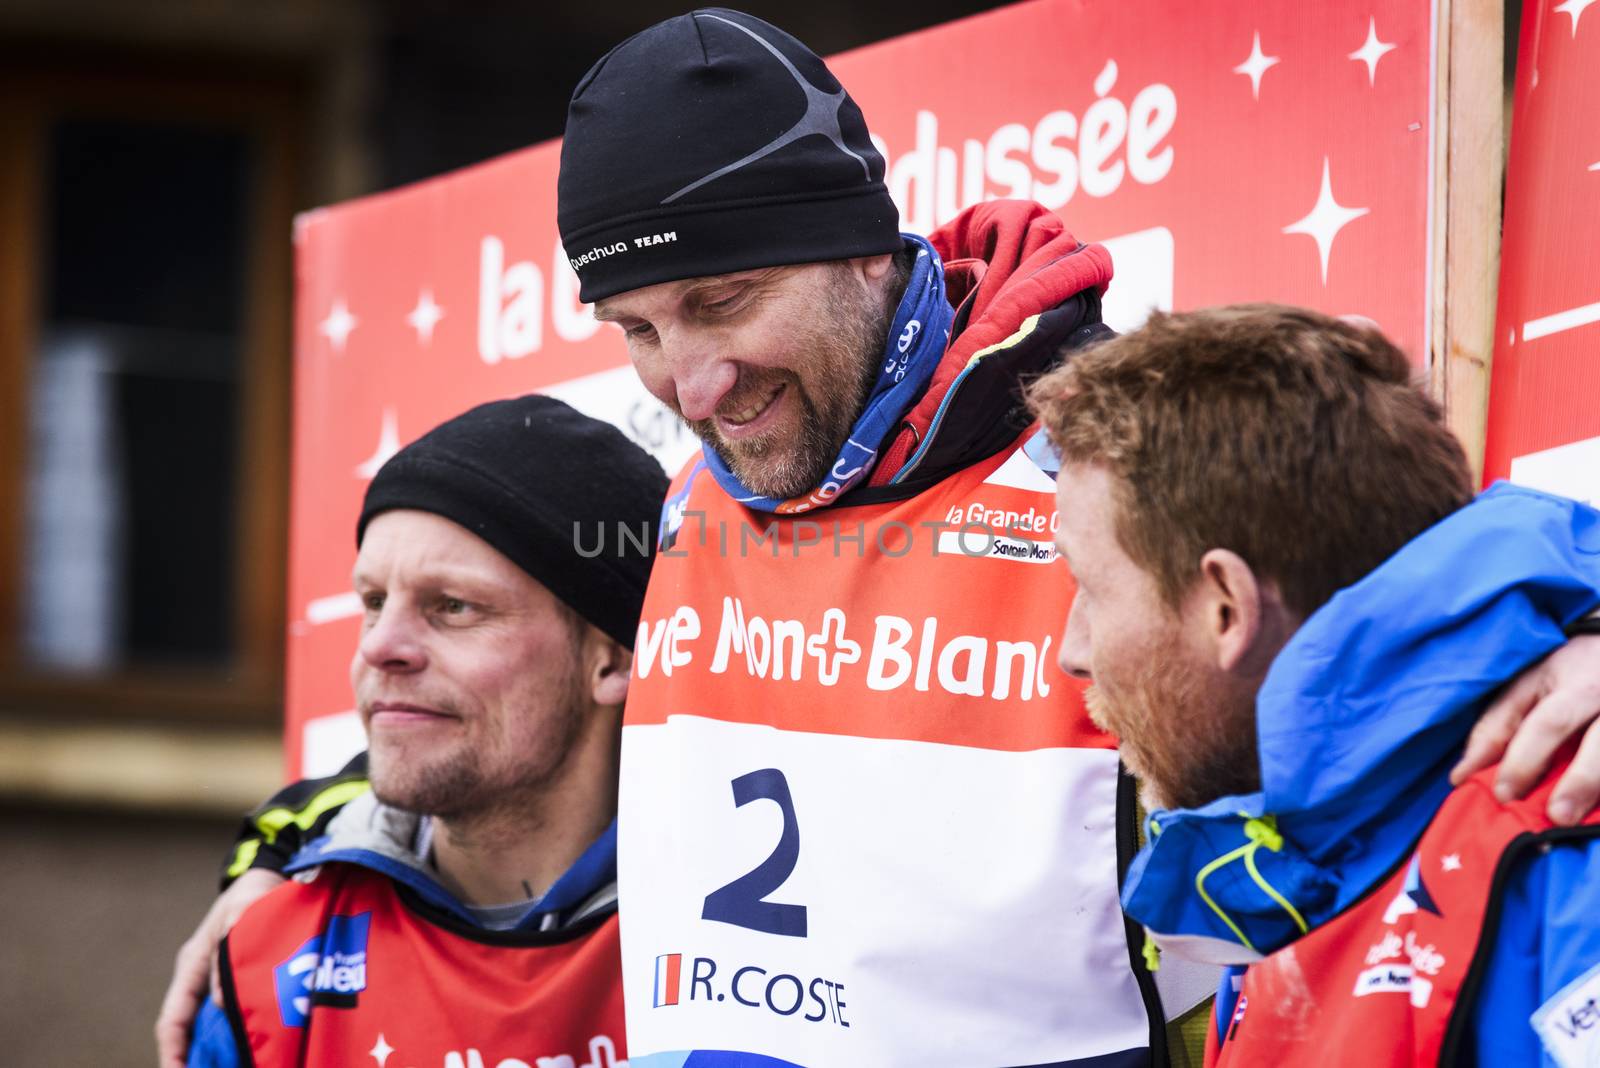 TERMIGNON, VANOISE, FRANCE - JANUARY 20 2016 - The podium Remy COSTE the winner of the GRANDE ODYSSEE the hardest mushers race, the 2nd Jimmy PETTERSSON and 3th named Jean-Philippe PONTHIER, Vanoise, Alps